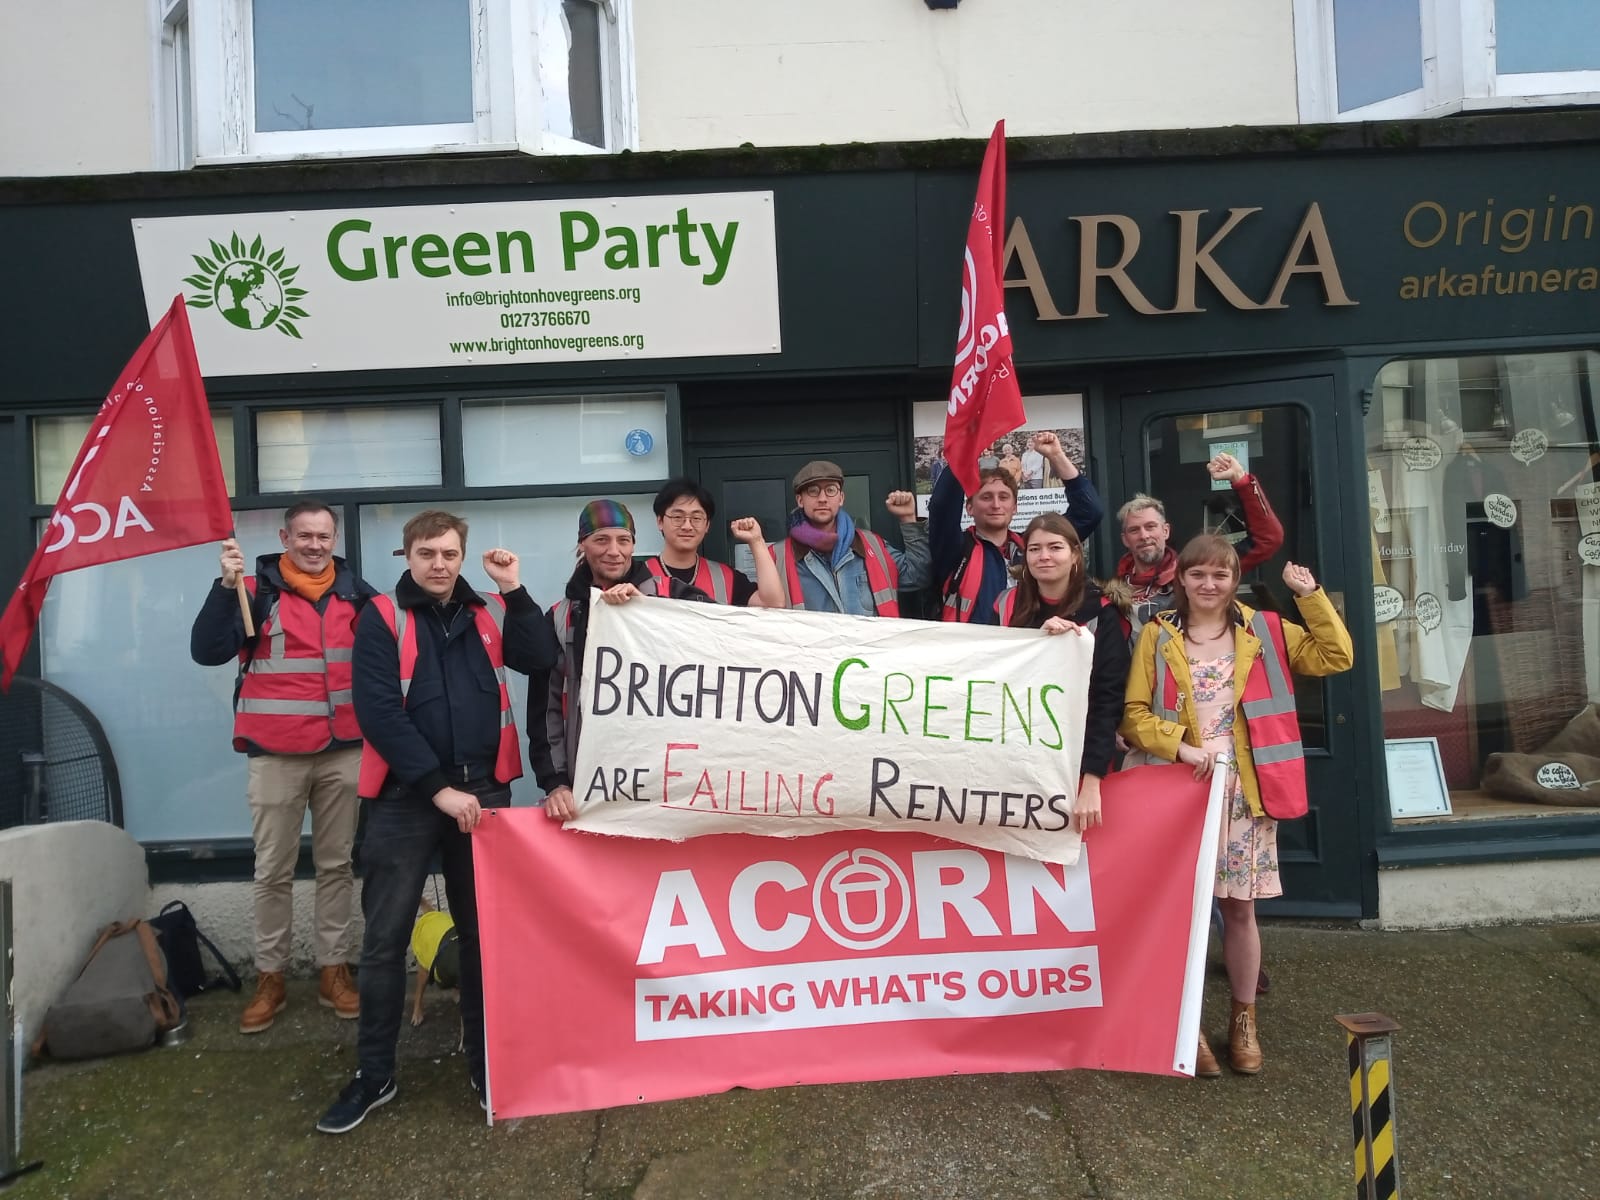 A picture of ACORN members protesting outside the Green Party office